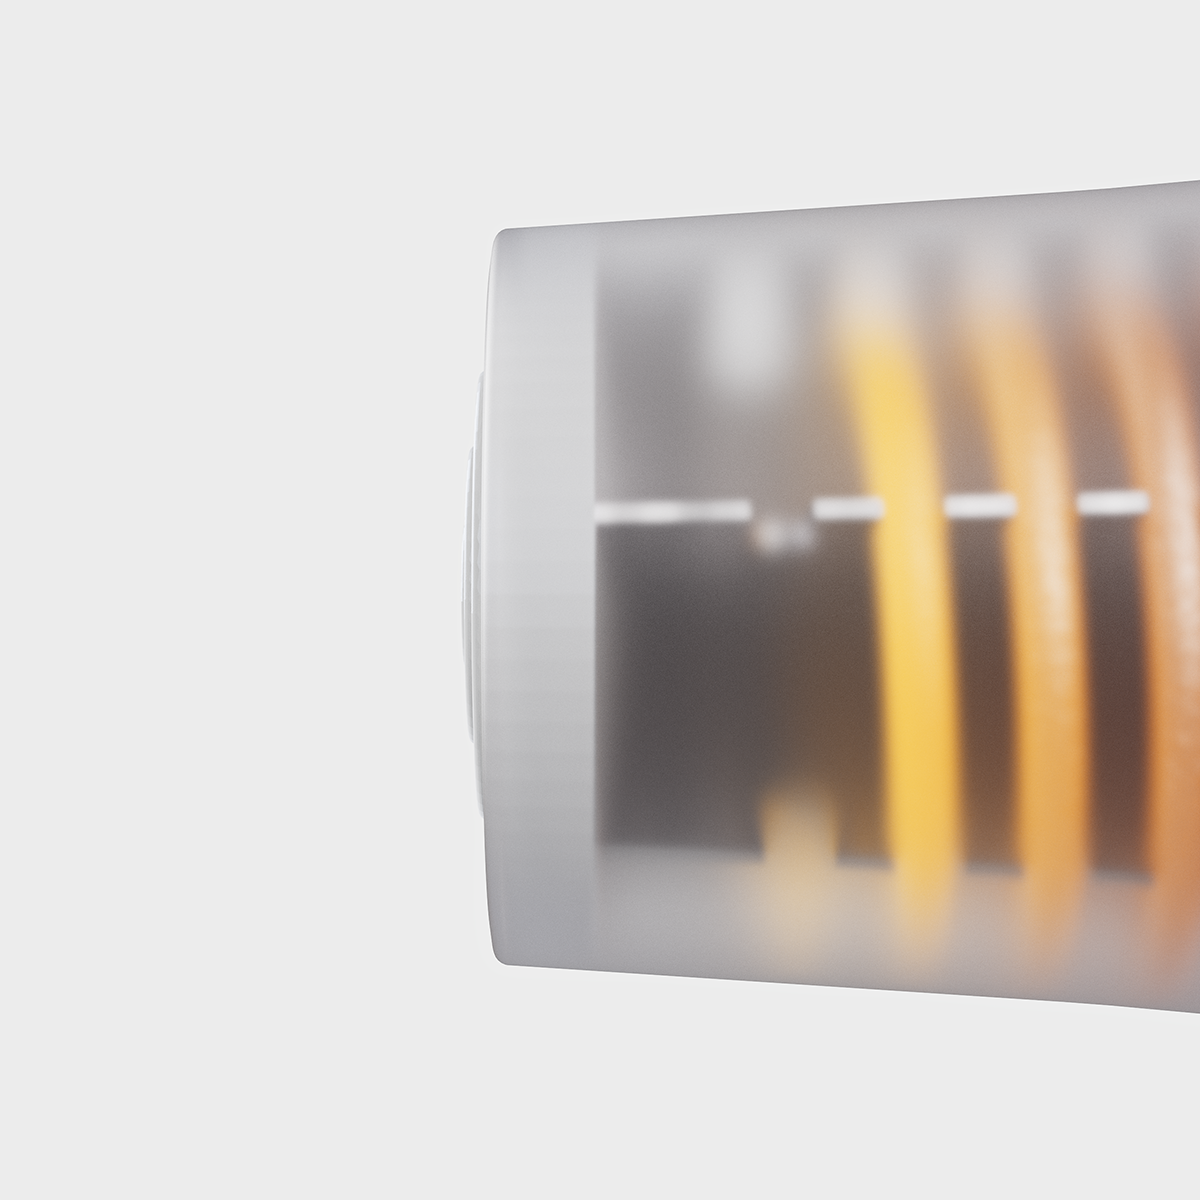 Rendering of a translucent hairdryer, close-up